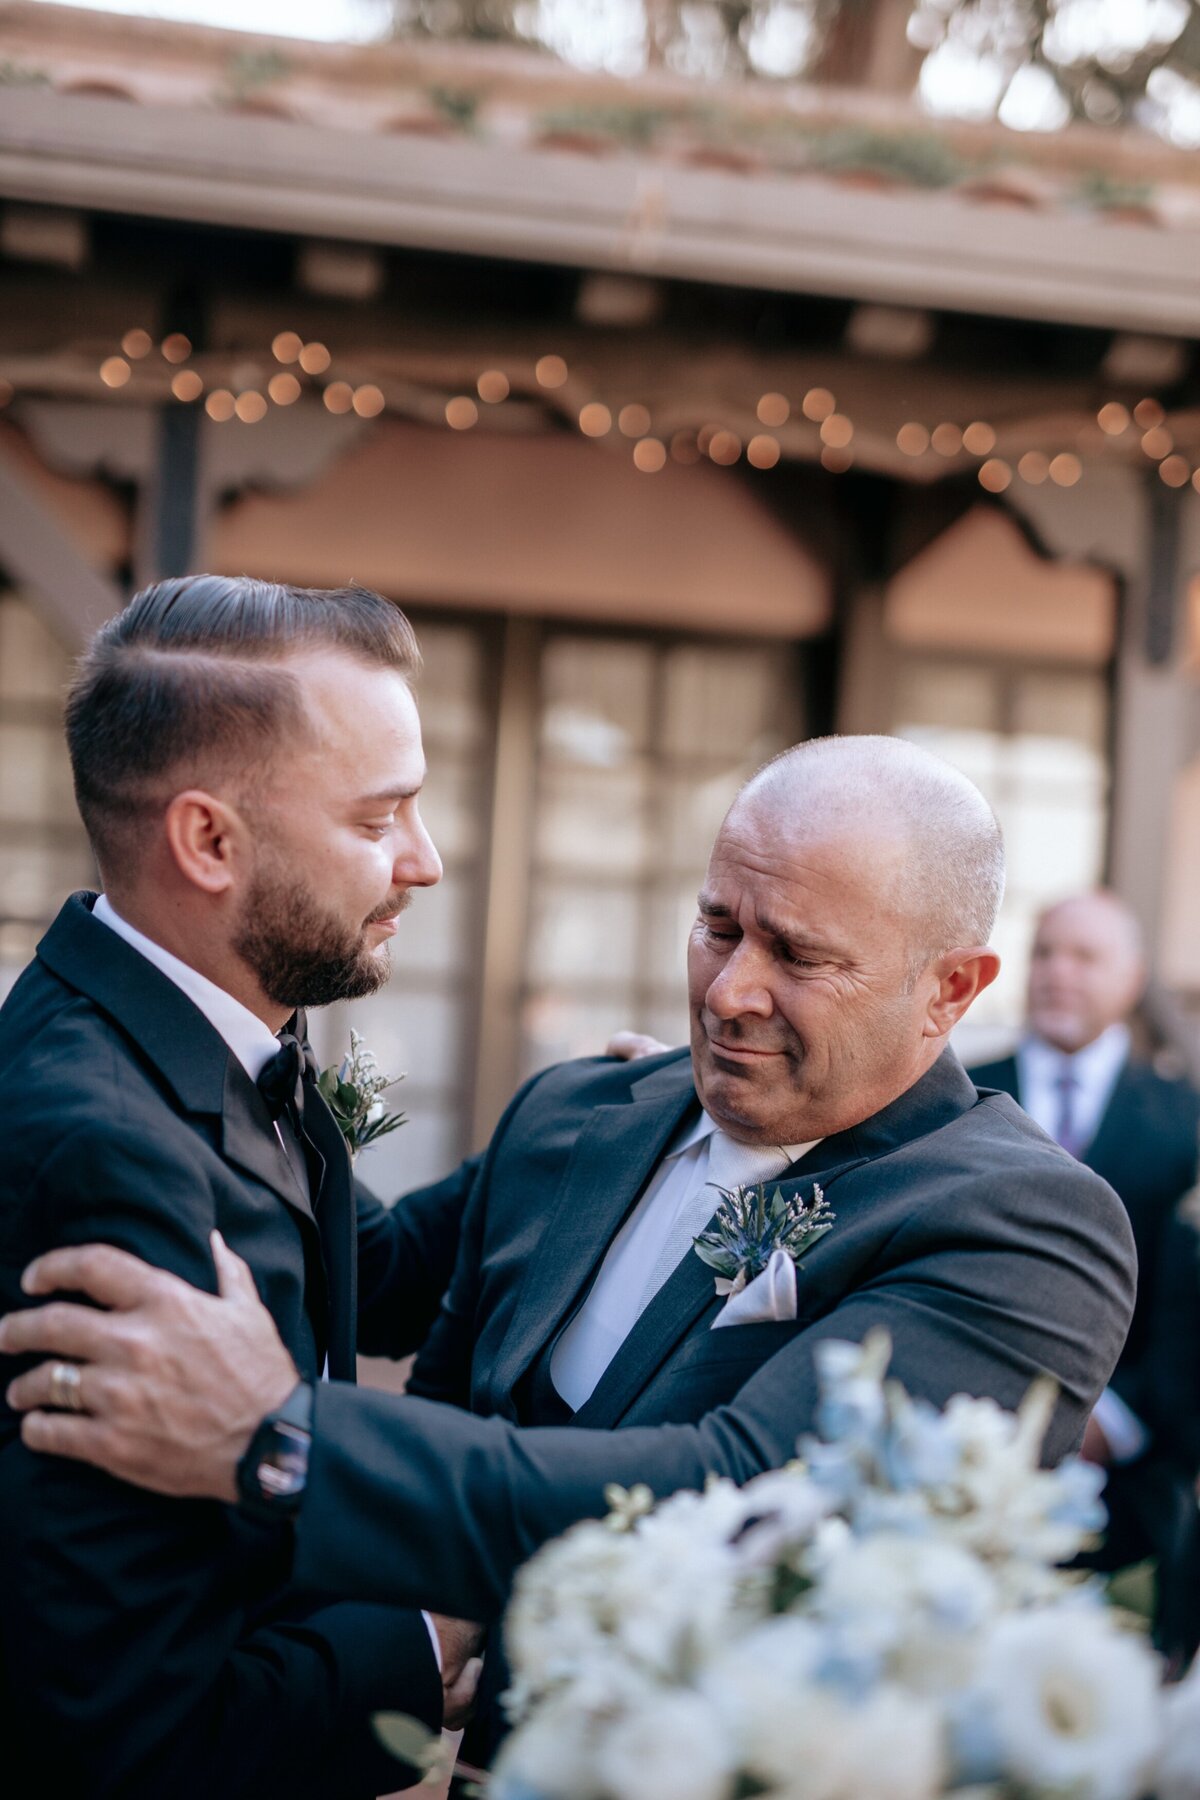 Father and Son embracing at a wedding.